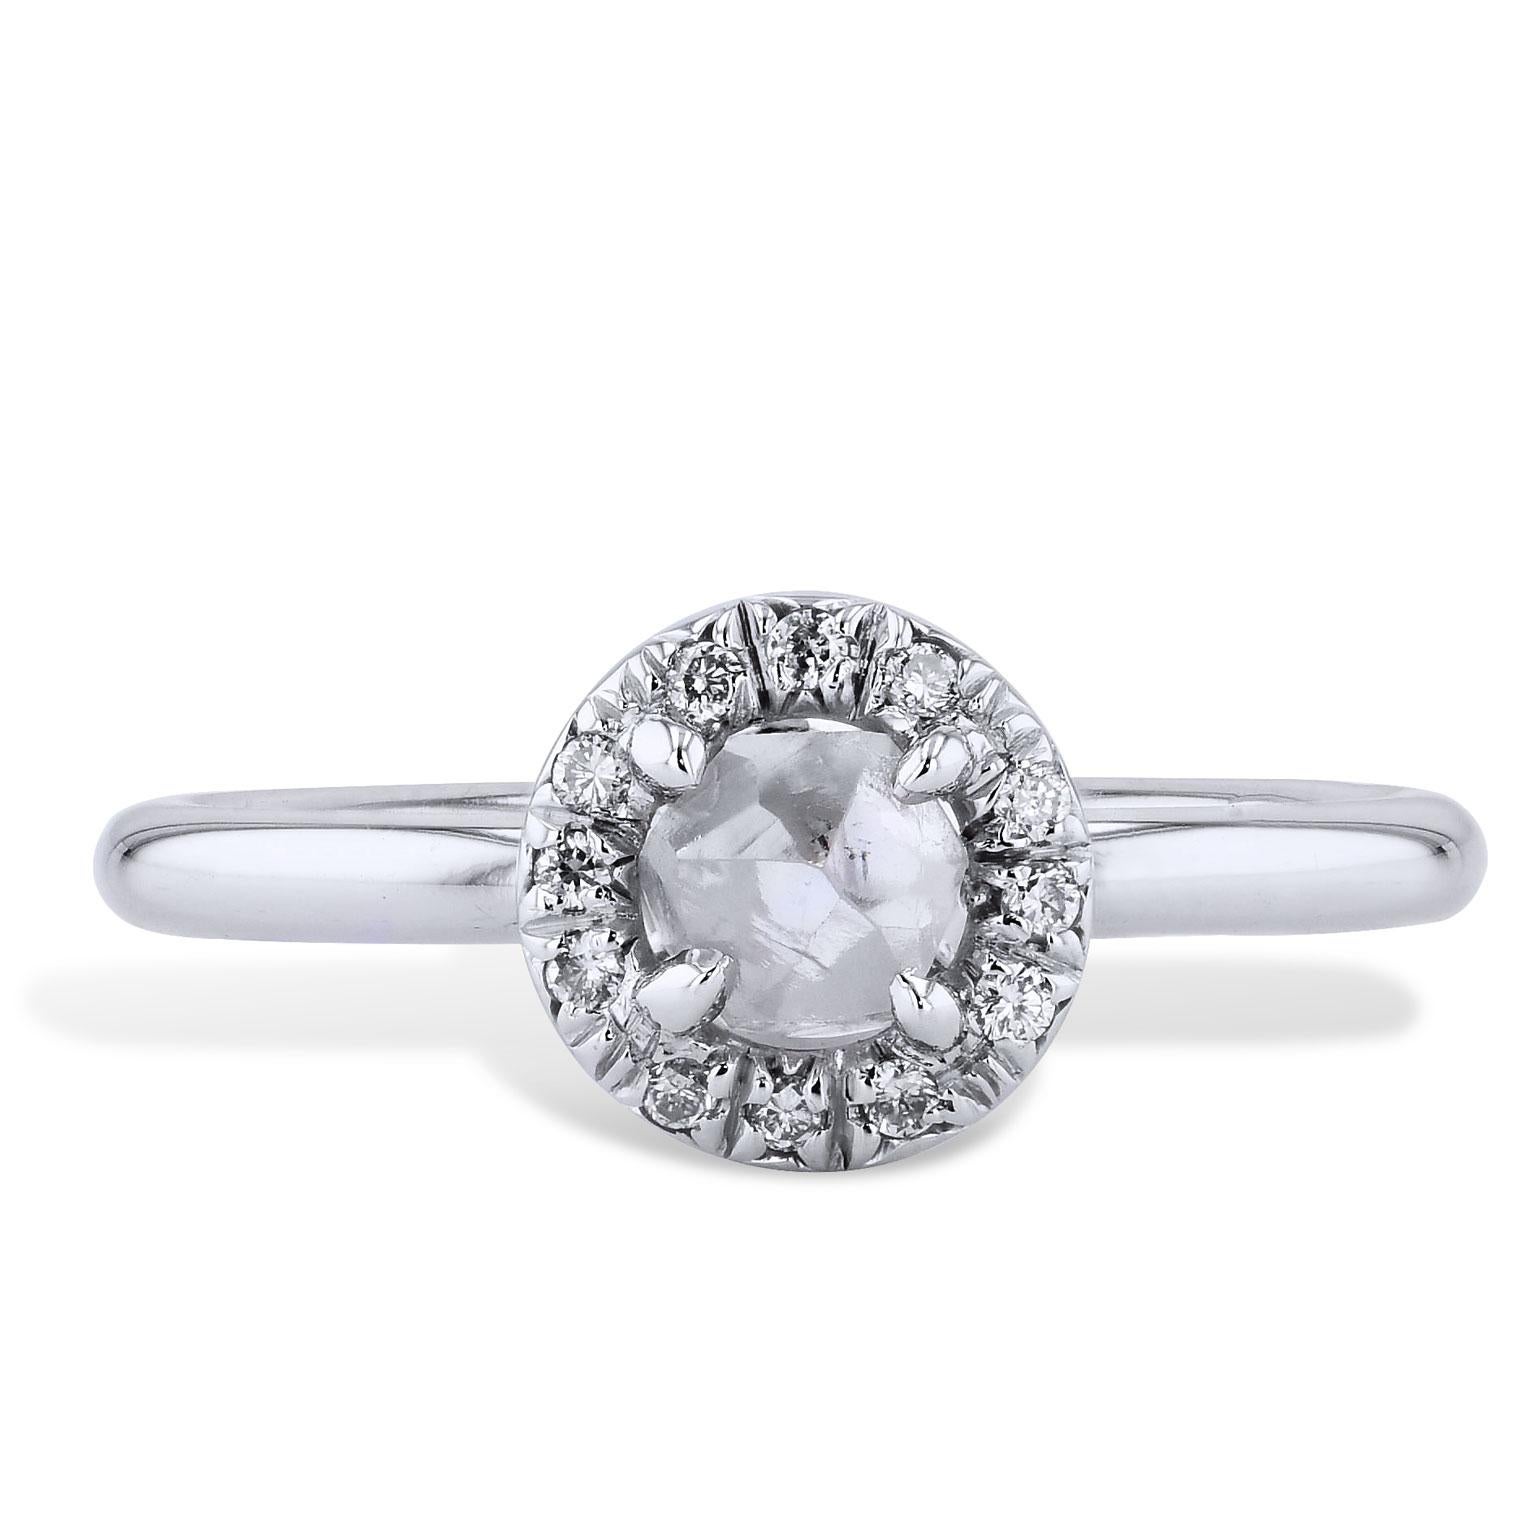 Handmade by H&H 0.64 Carat Natural Rough Diamond 18 karat white gold and Palladium Engagement Ring

Be astounded by the beauty of this 0.64 carat natural rough diamond, featuring 0.08 carats of pave diamonds (H/I/SI) encircled around the center in